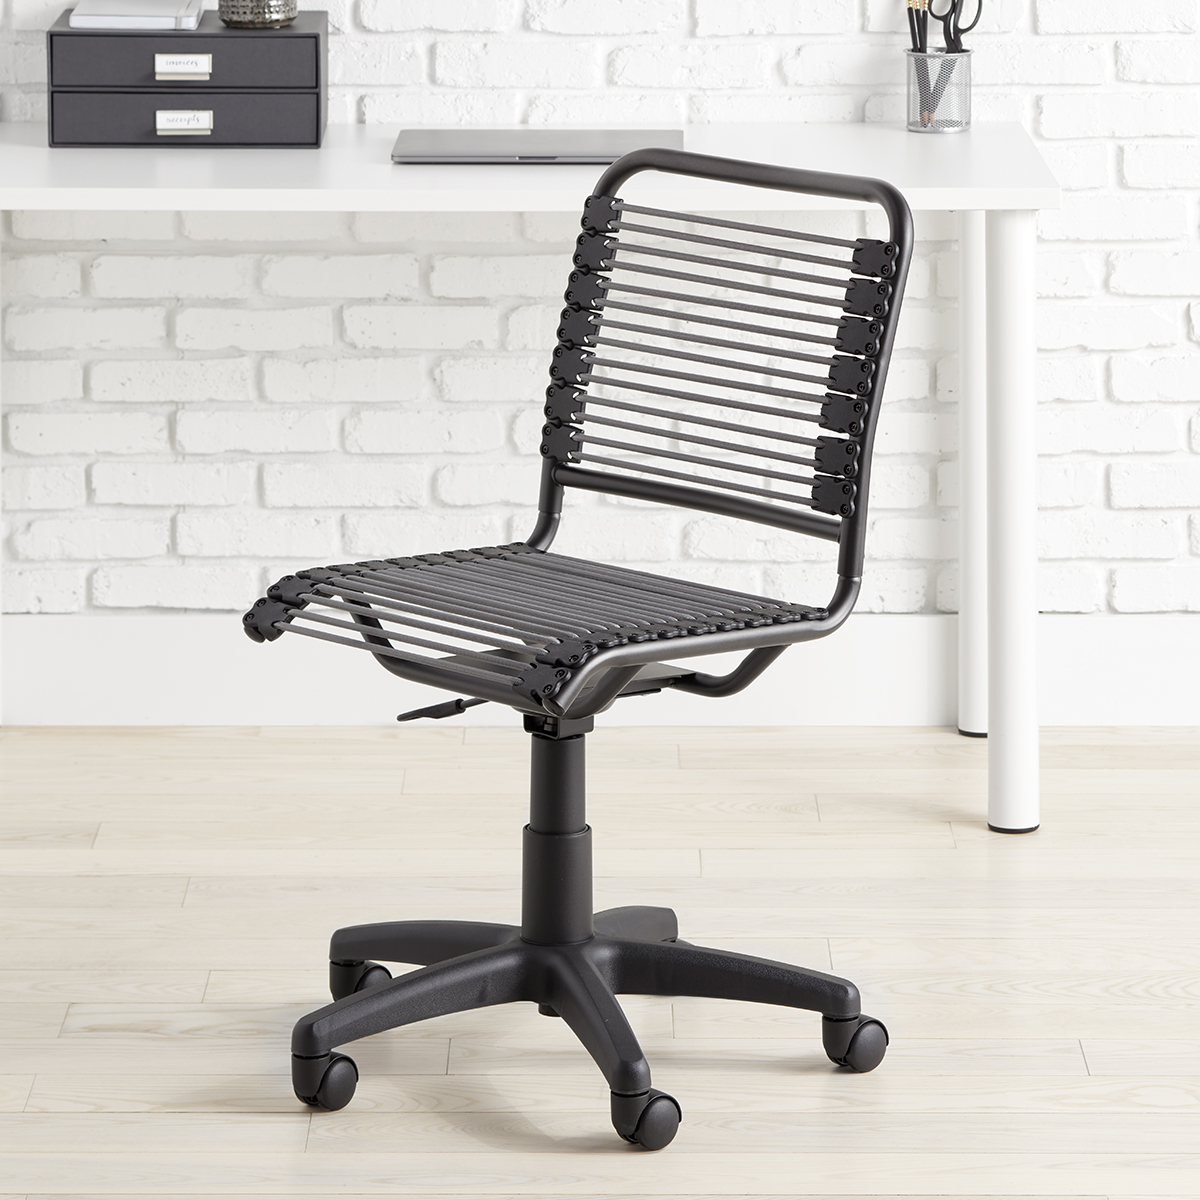 https://www.containerstore.com/catalogimages/458043/10078180-flat-bungee-office-chair-g.jpeg